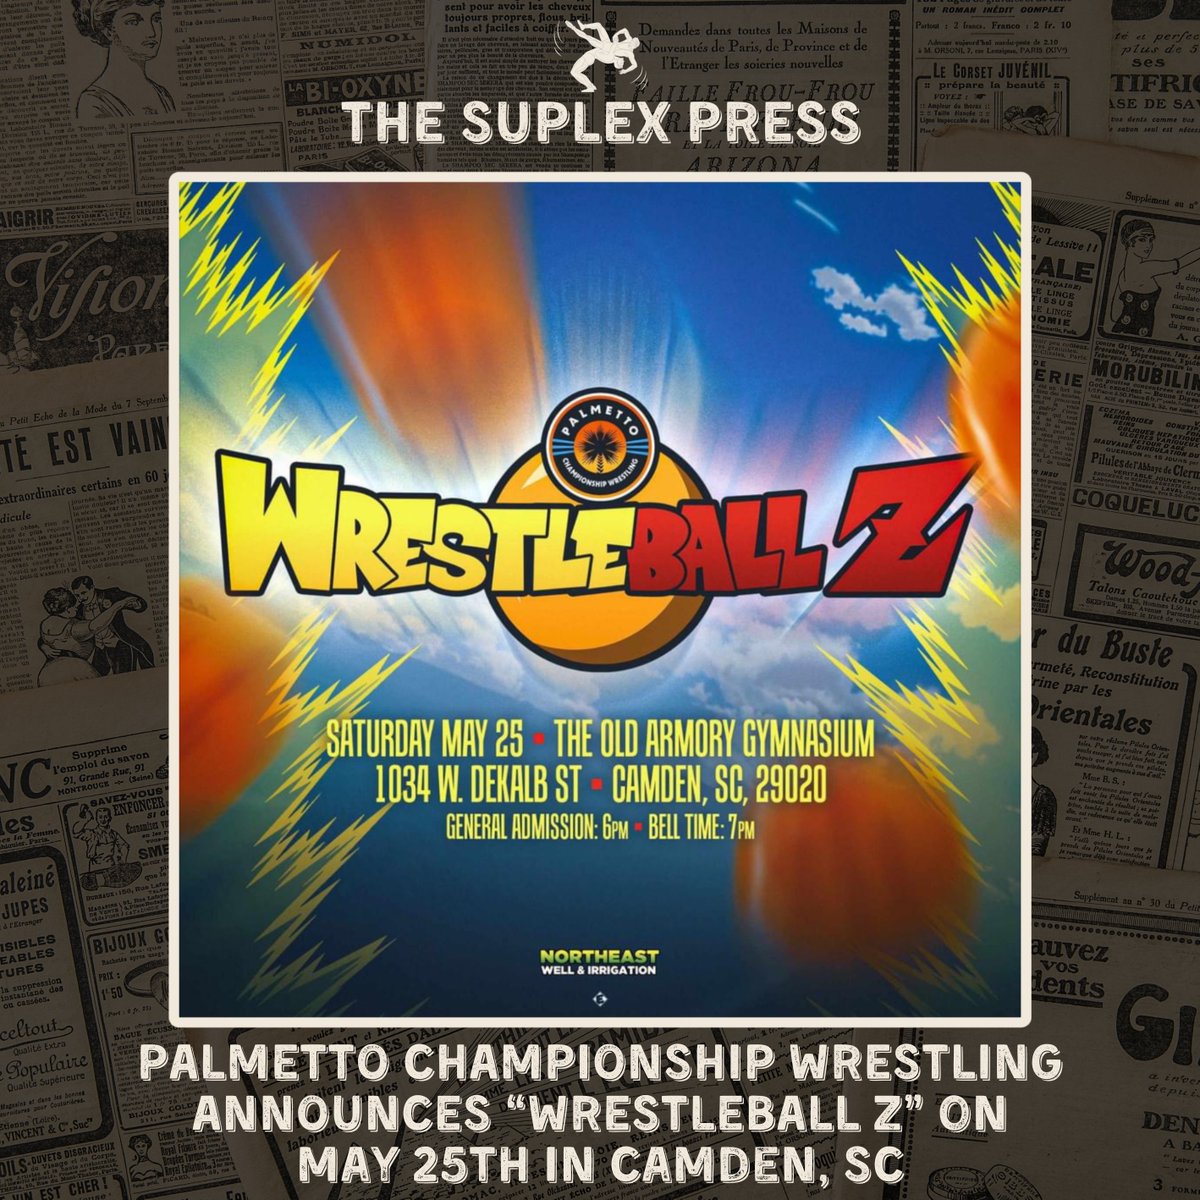 Palmetto Championship Wrestling has announced their next show! They continue the tradition of having some of the coolest show names around with “WrestleBall Z” taking place on May 25th in Camden, SC Get your tickets at pcw.ticketspice.com